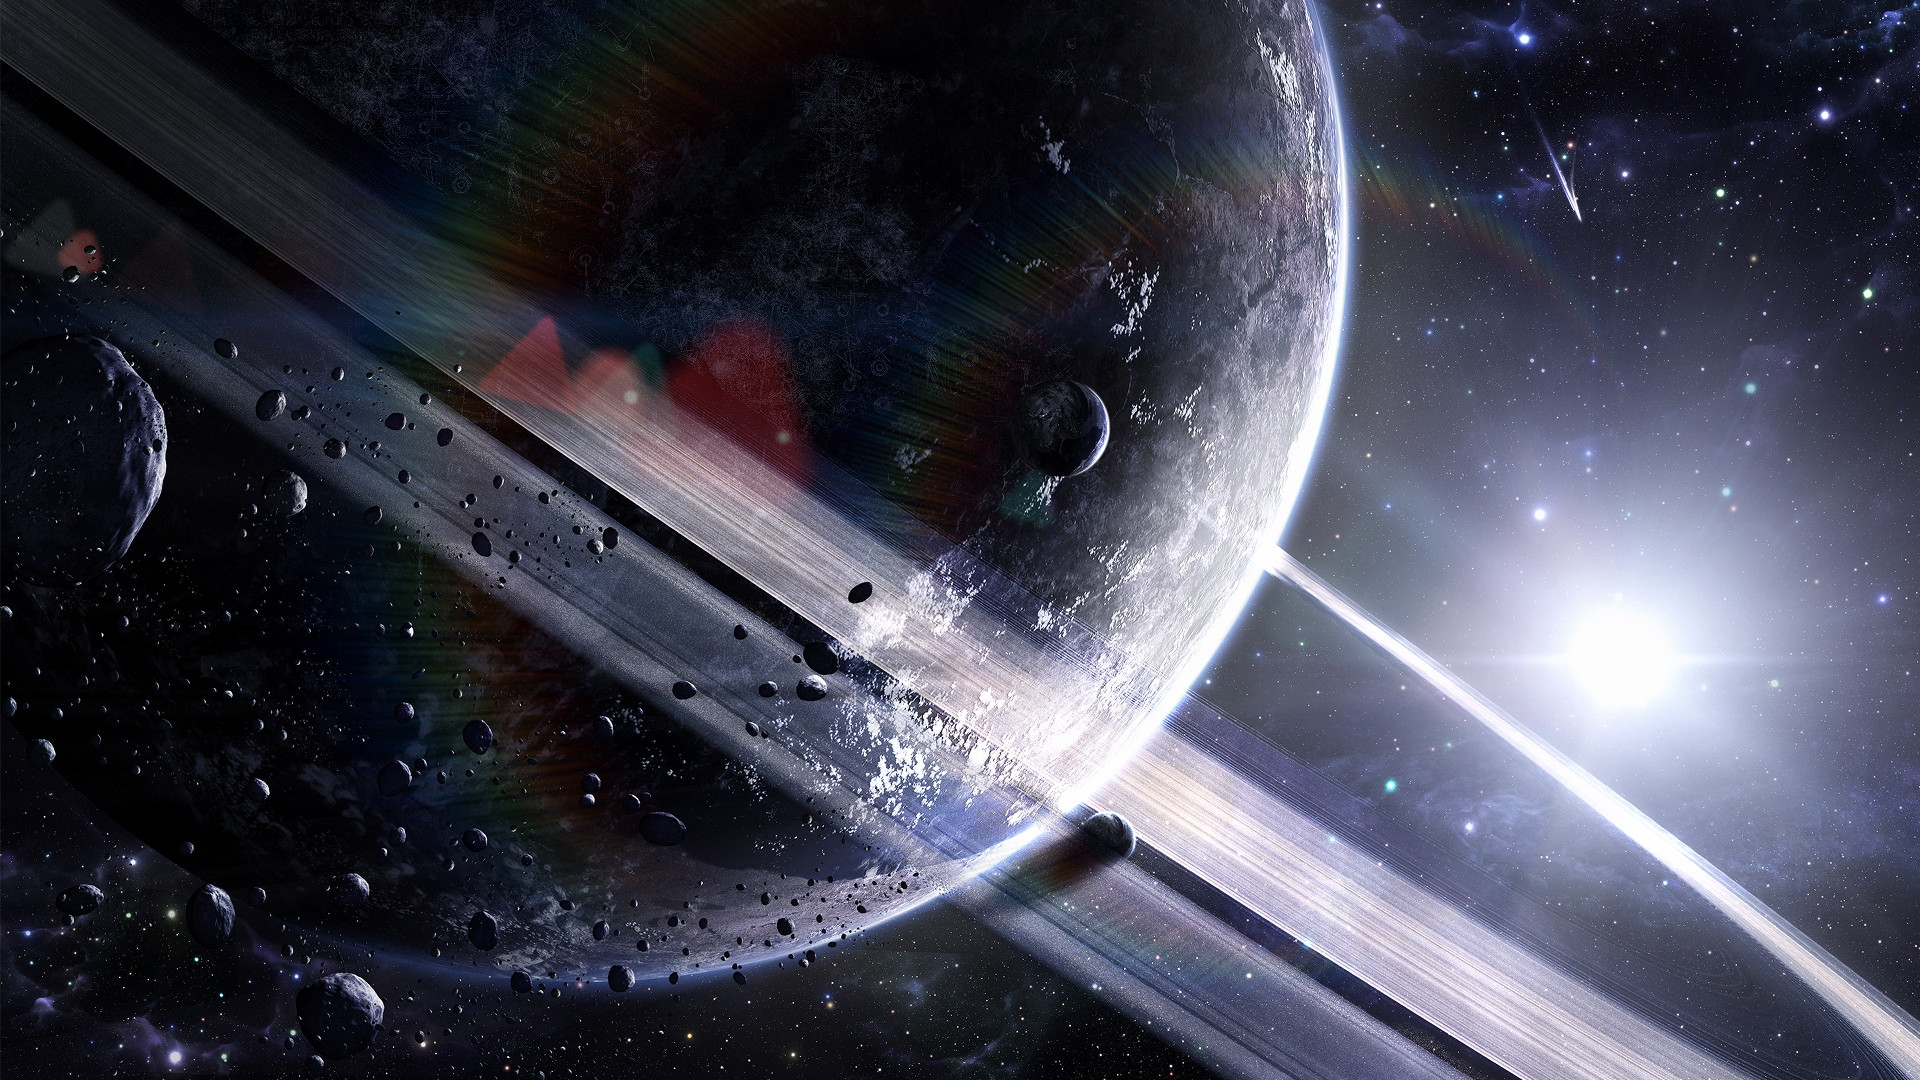 Space Hd Wallpapers 1080P wallpaper Wallpapers Photos Pictures